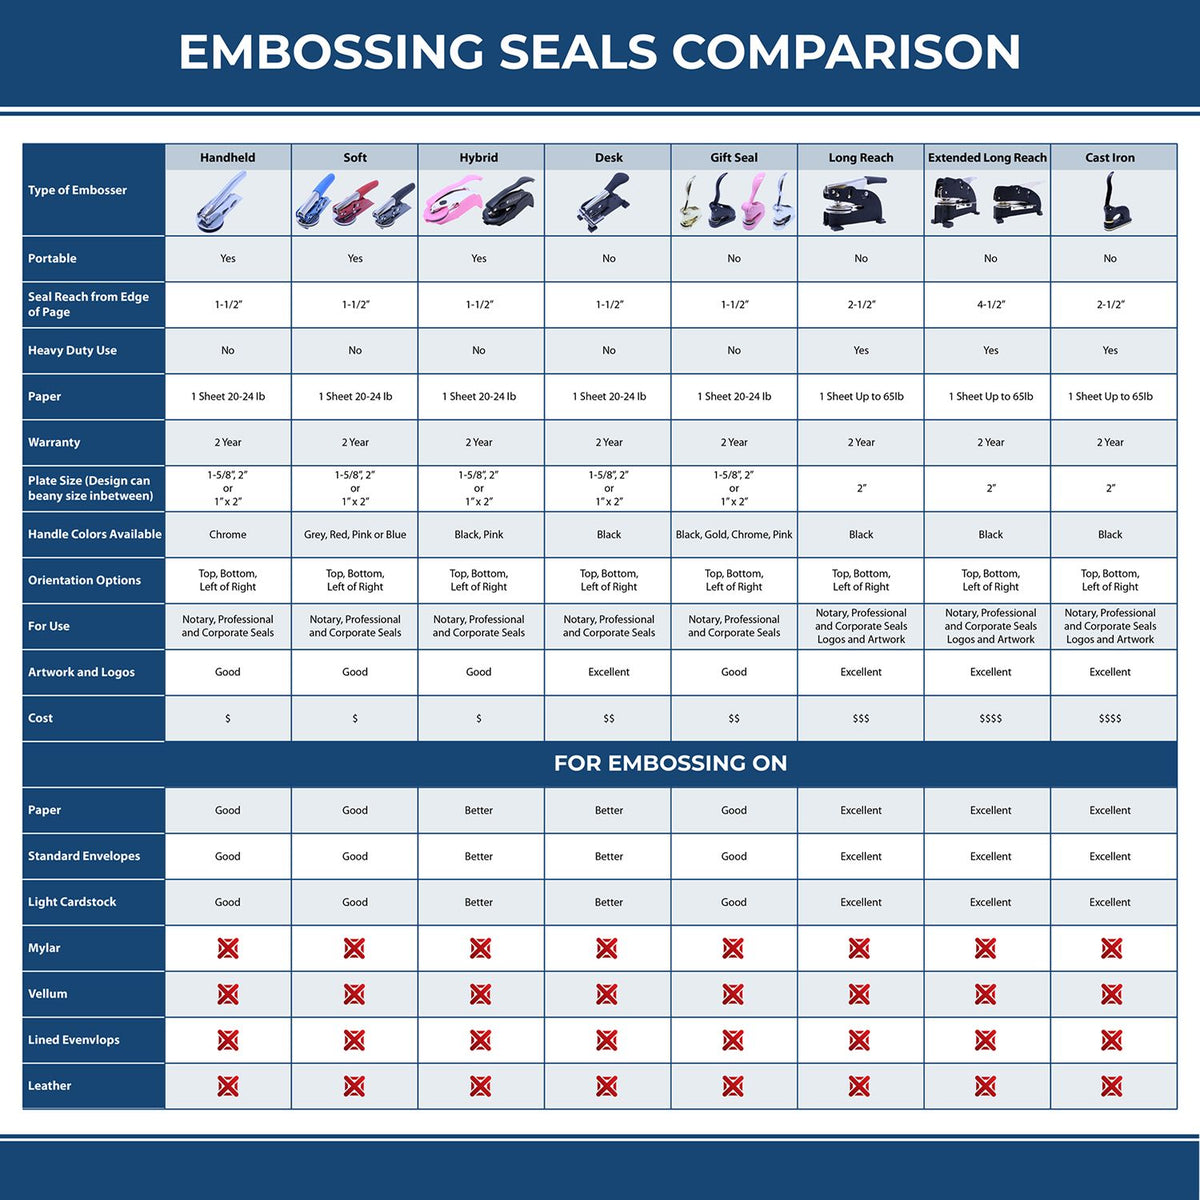 A comparison chart for the different types of mount models available for the Mississippi Desk Surveyor Seal Embosser.